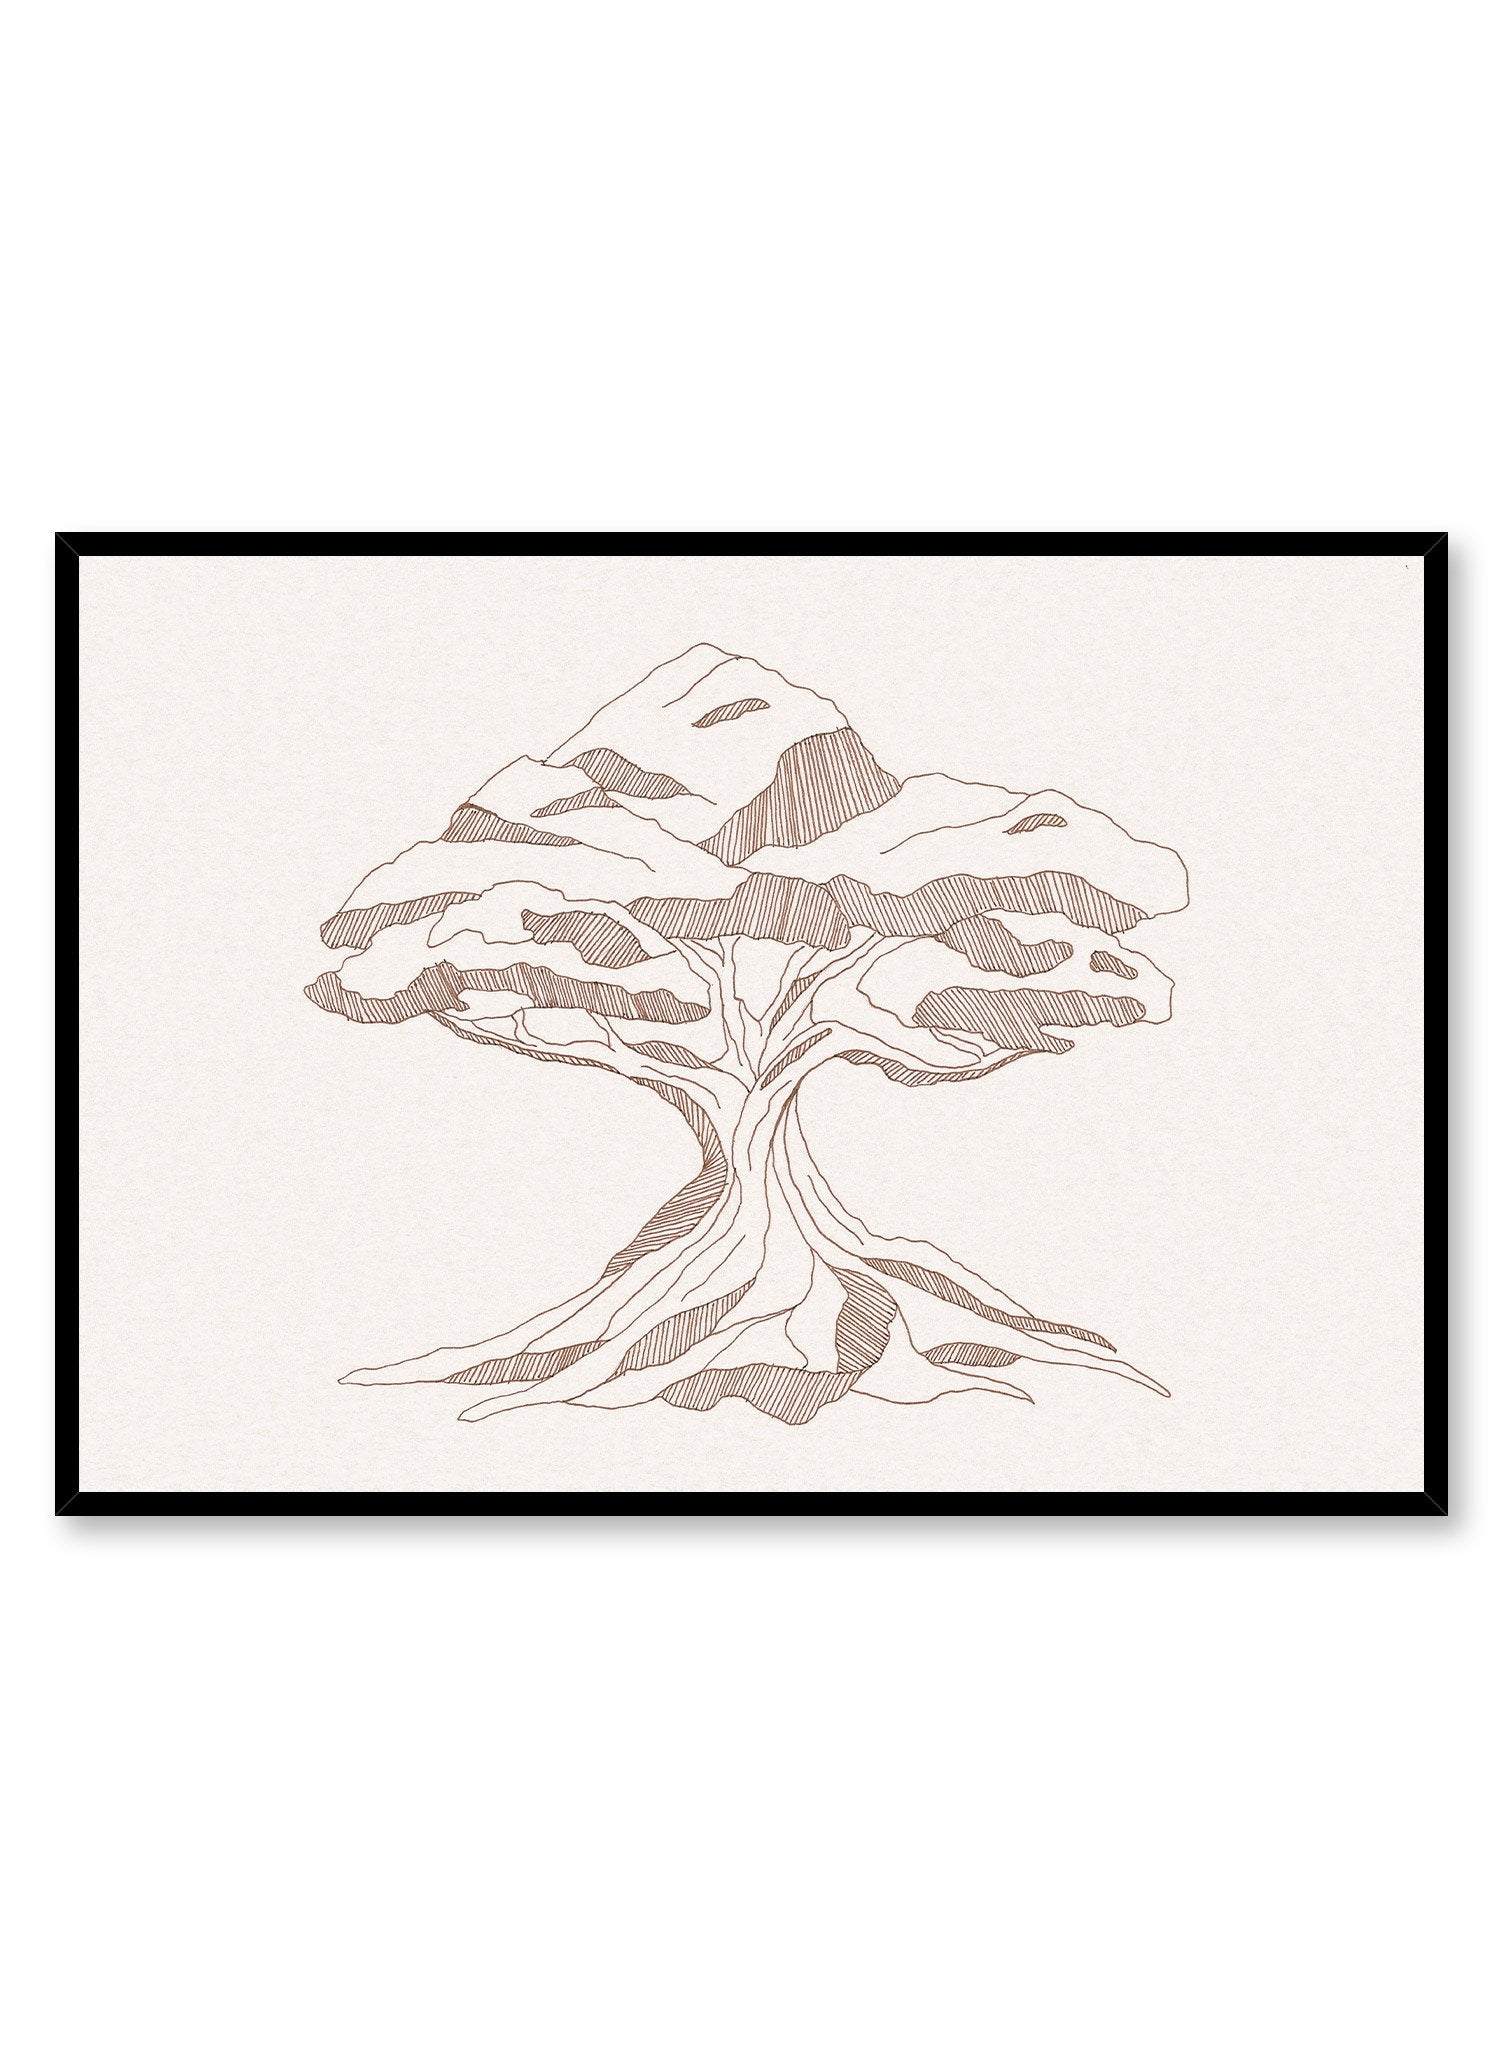 Bonsai is a minimalist illustration by Opposite Wall of a humongous tree drawn to show the details in its shadows.